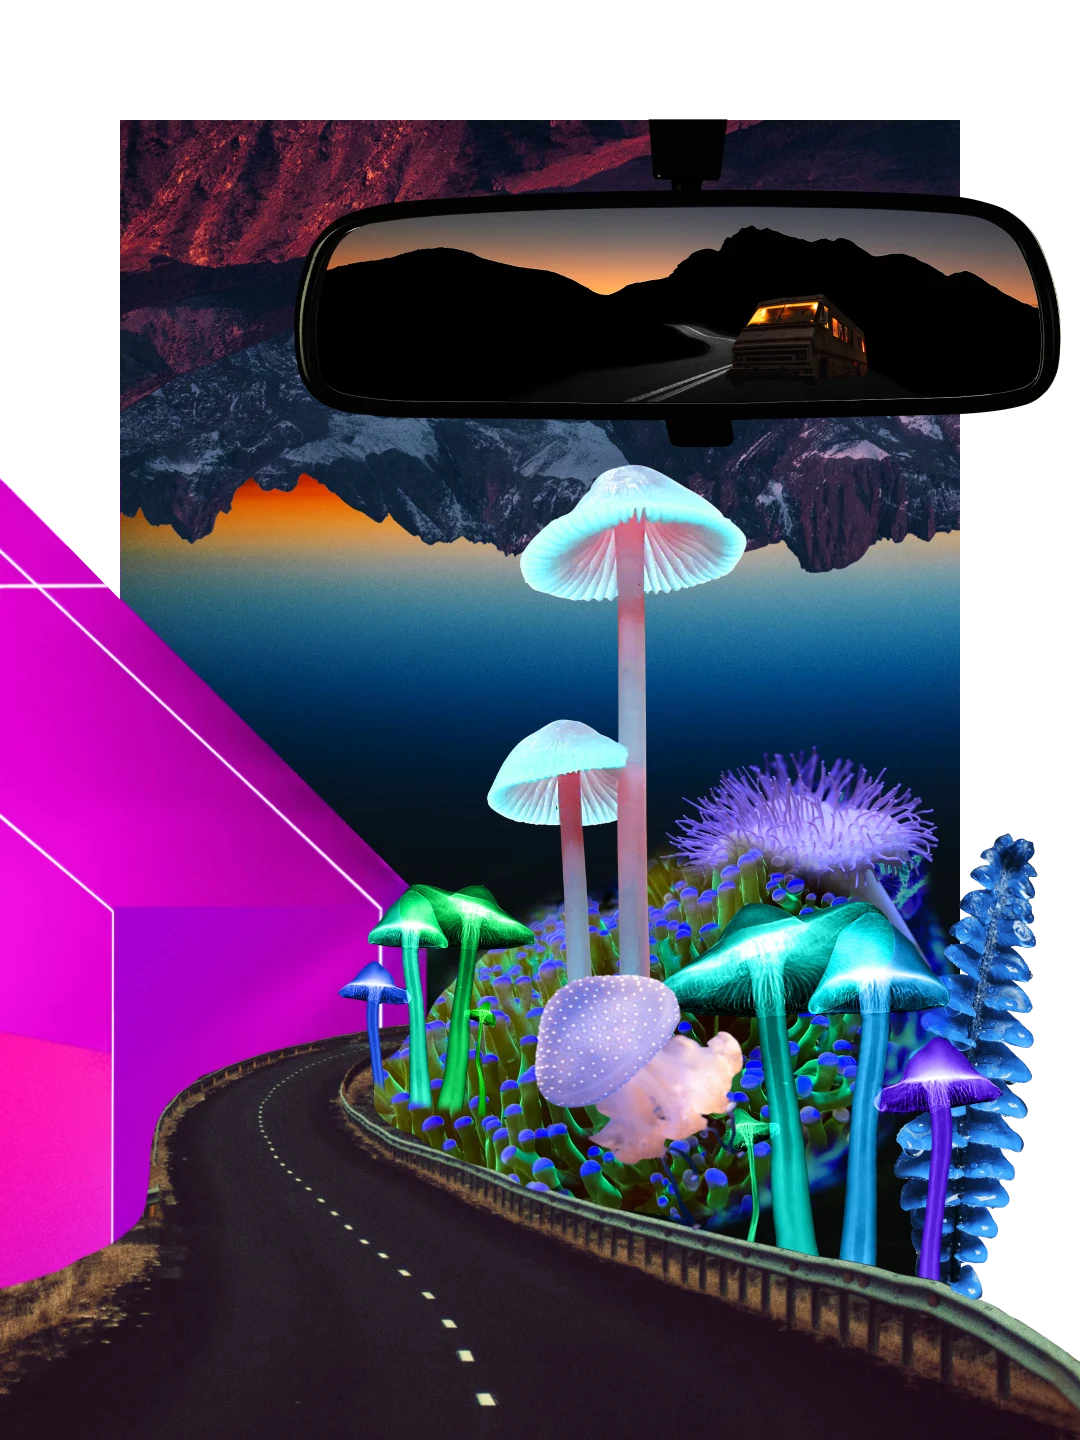 Vibrant collage of night-time themes. A neon pink geometric shape is on the left, with dark mountain formations and large cartoon mushrooms in the foreground. A rearview mirror is at the top, with a minivan, road and mountains at sunset visible in it.
